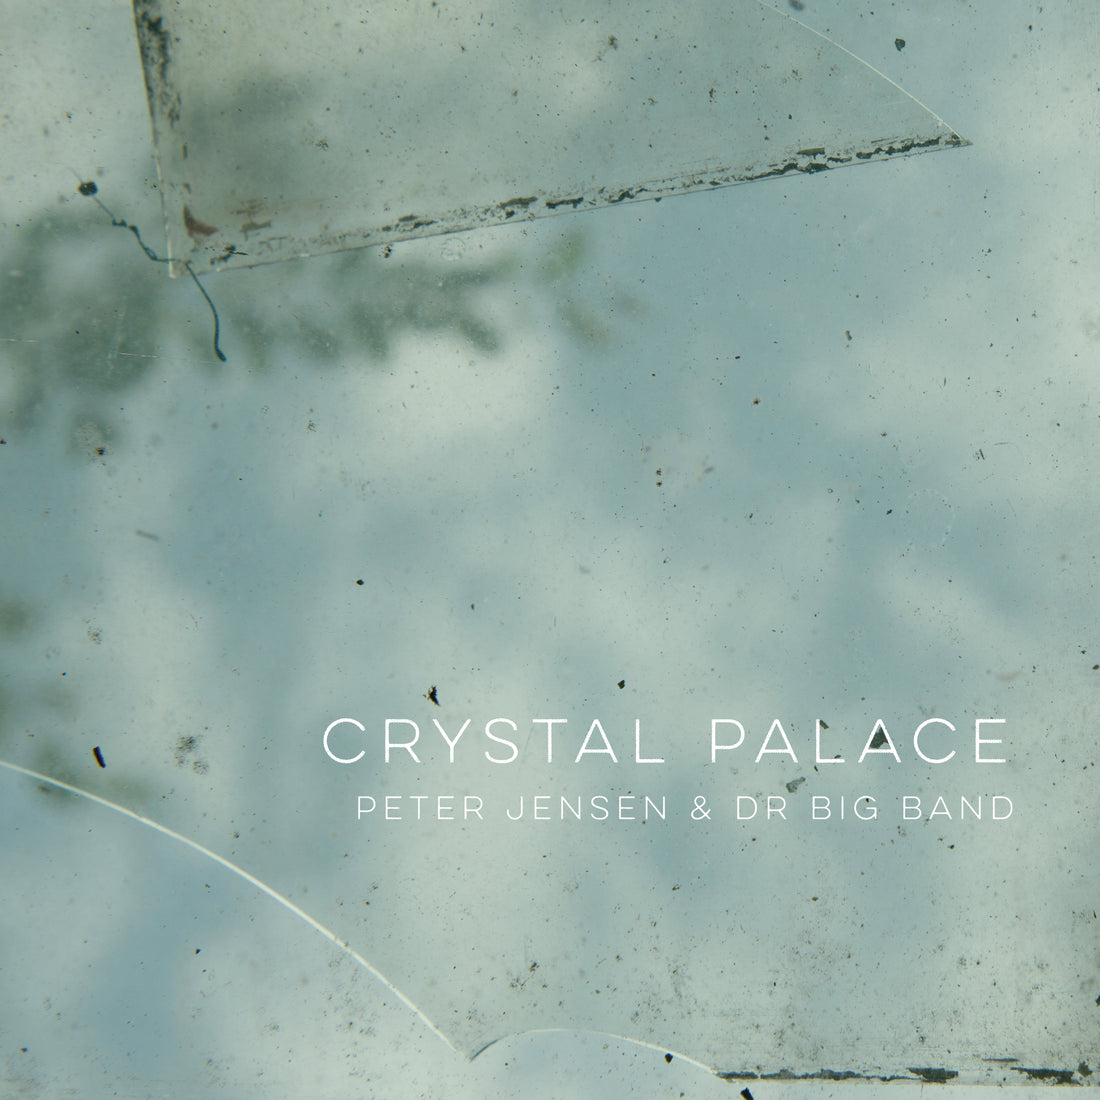 Peter Jensen & DR Big Band "Crystal Palace" is out on LP and digitally